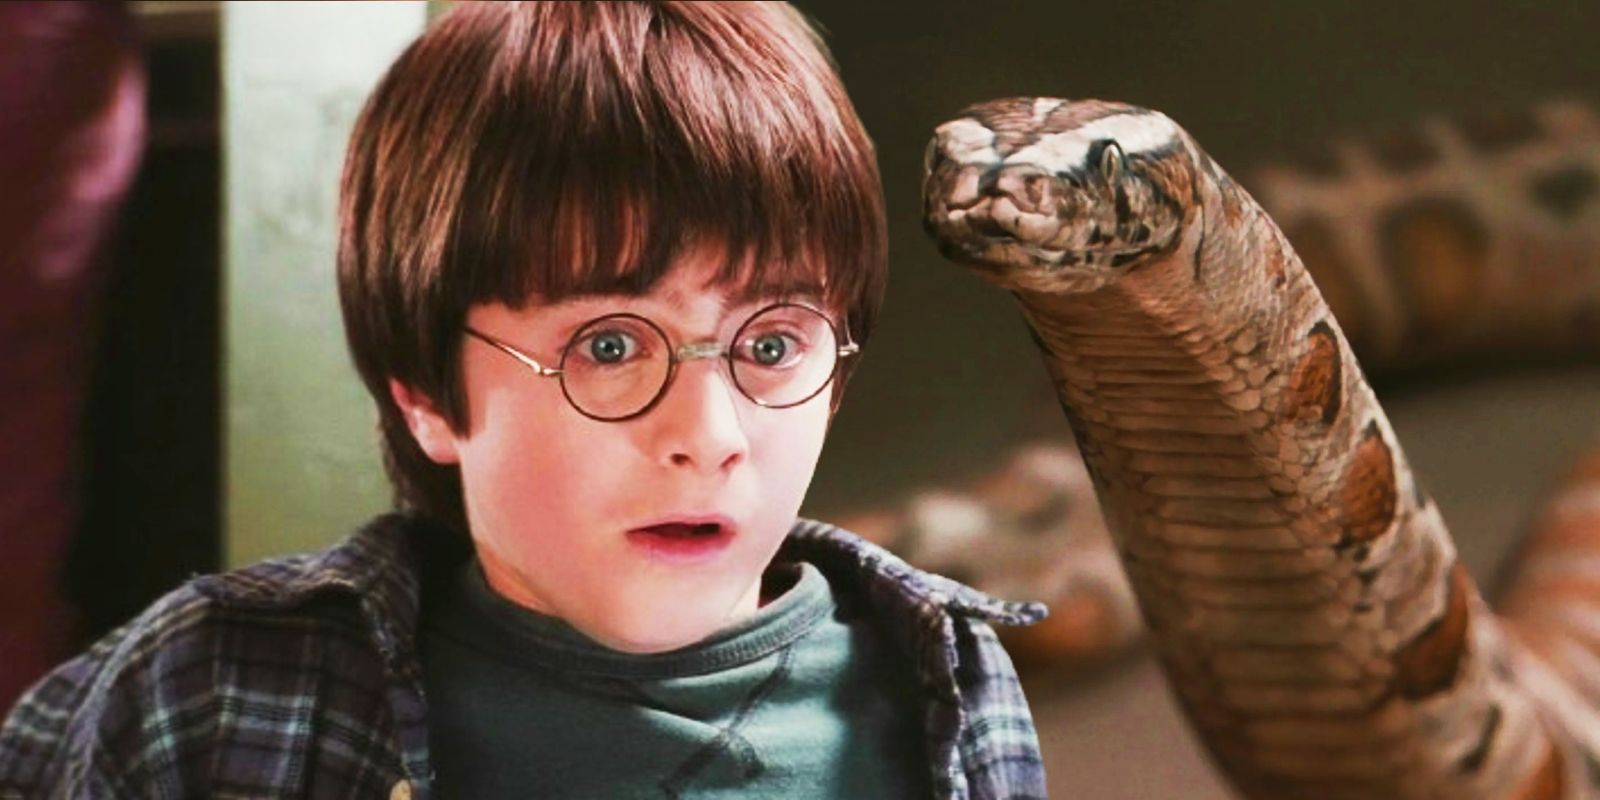 harry-potter’s-snake-interaction-in-first-movie-prompts-analysis-from-expert